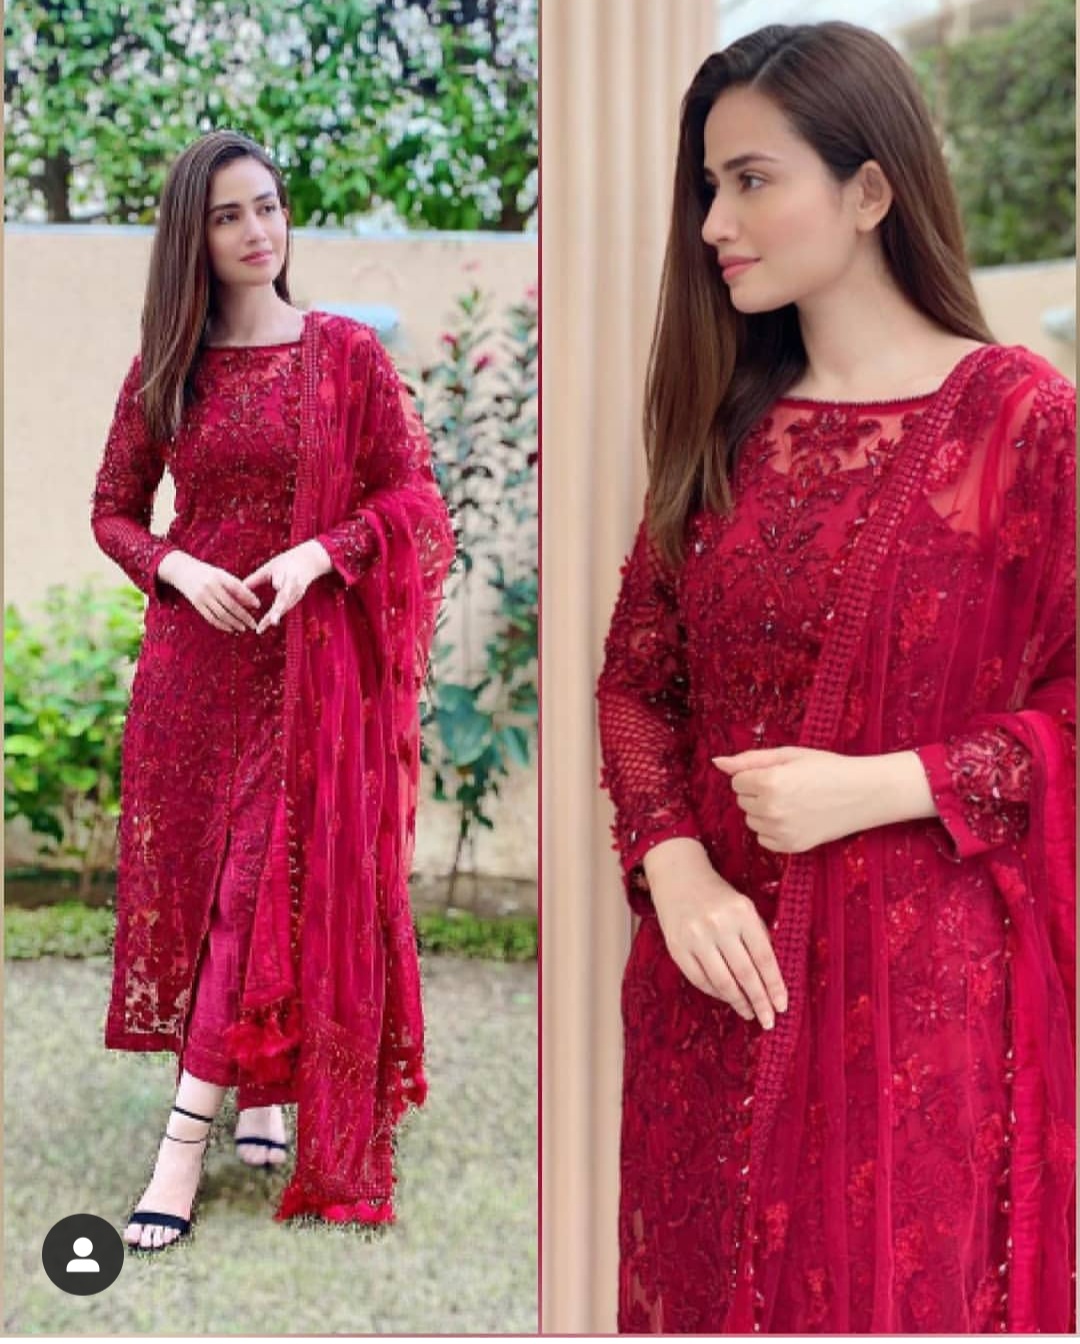 Sans Javed Looking Stunning In Rosy Red Dress | Reviewit.pk